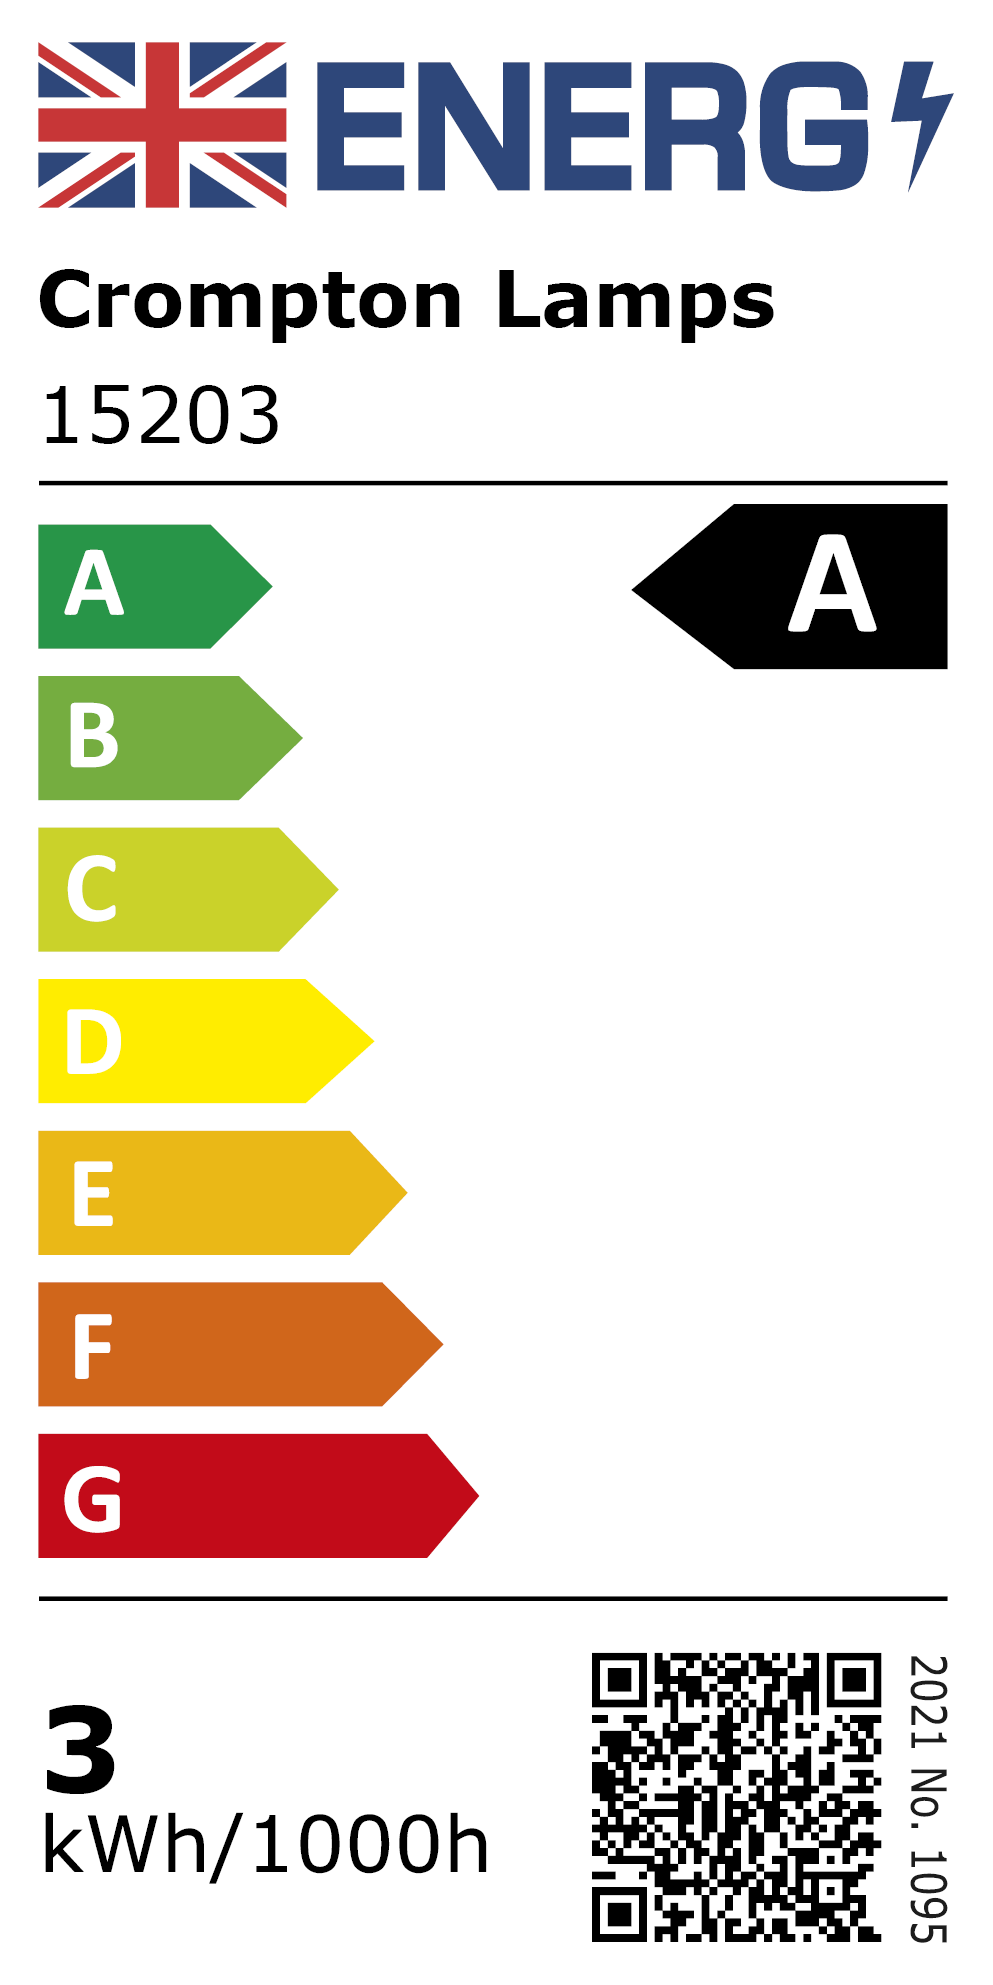 New 2021 Energy Rating Label: Stock Code 15203